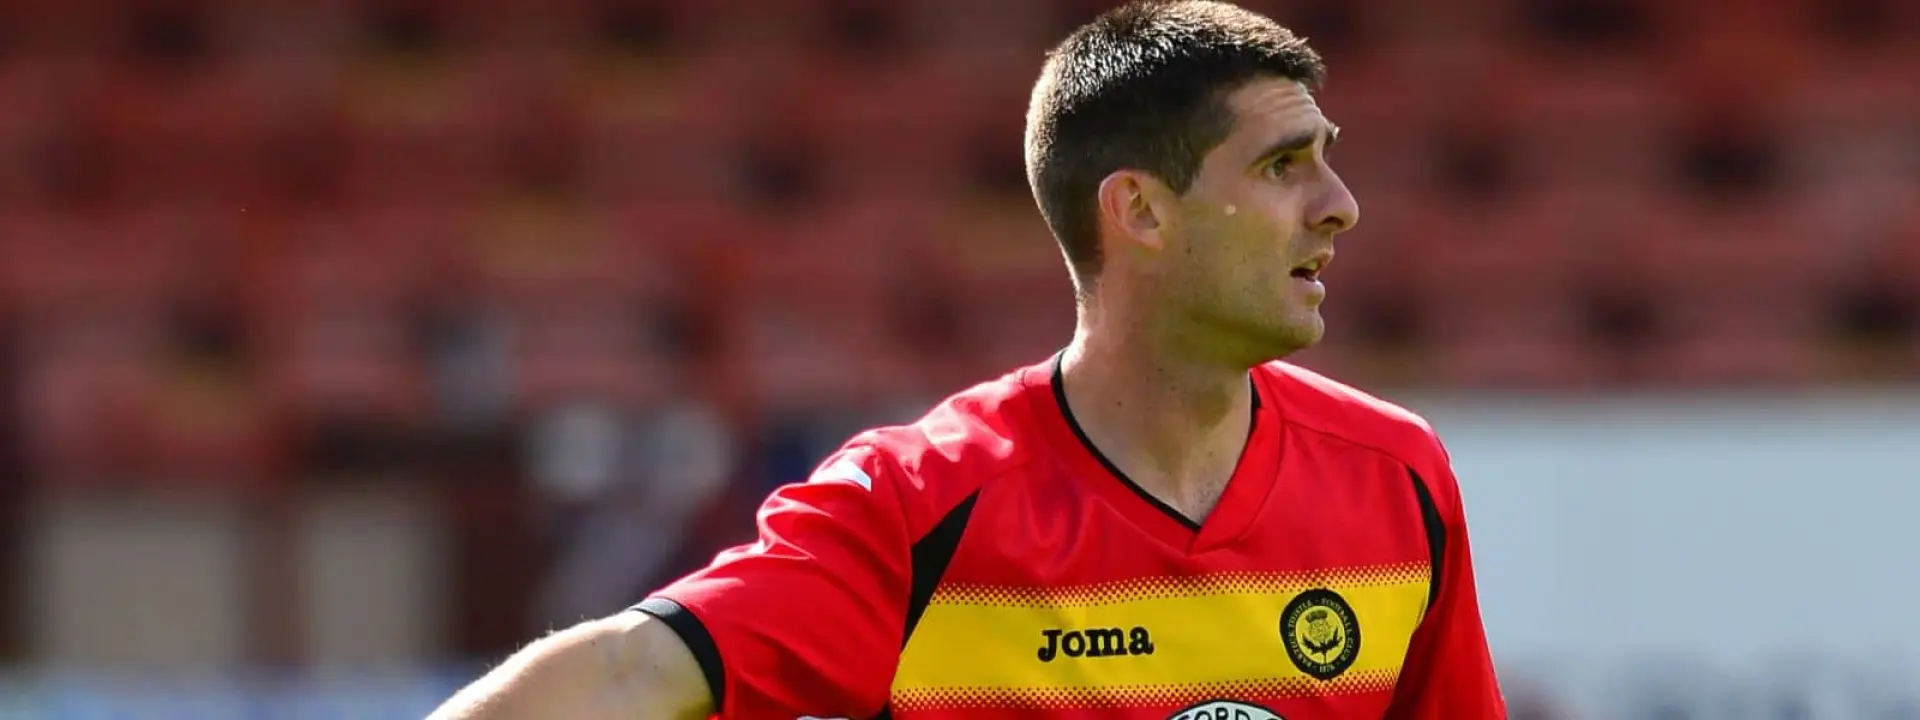 Kris Doolan plays in a friendly against Rotherham